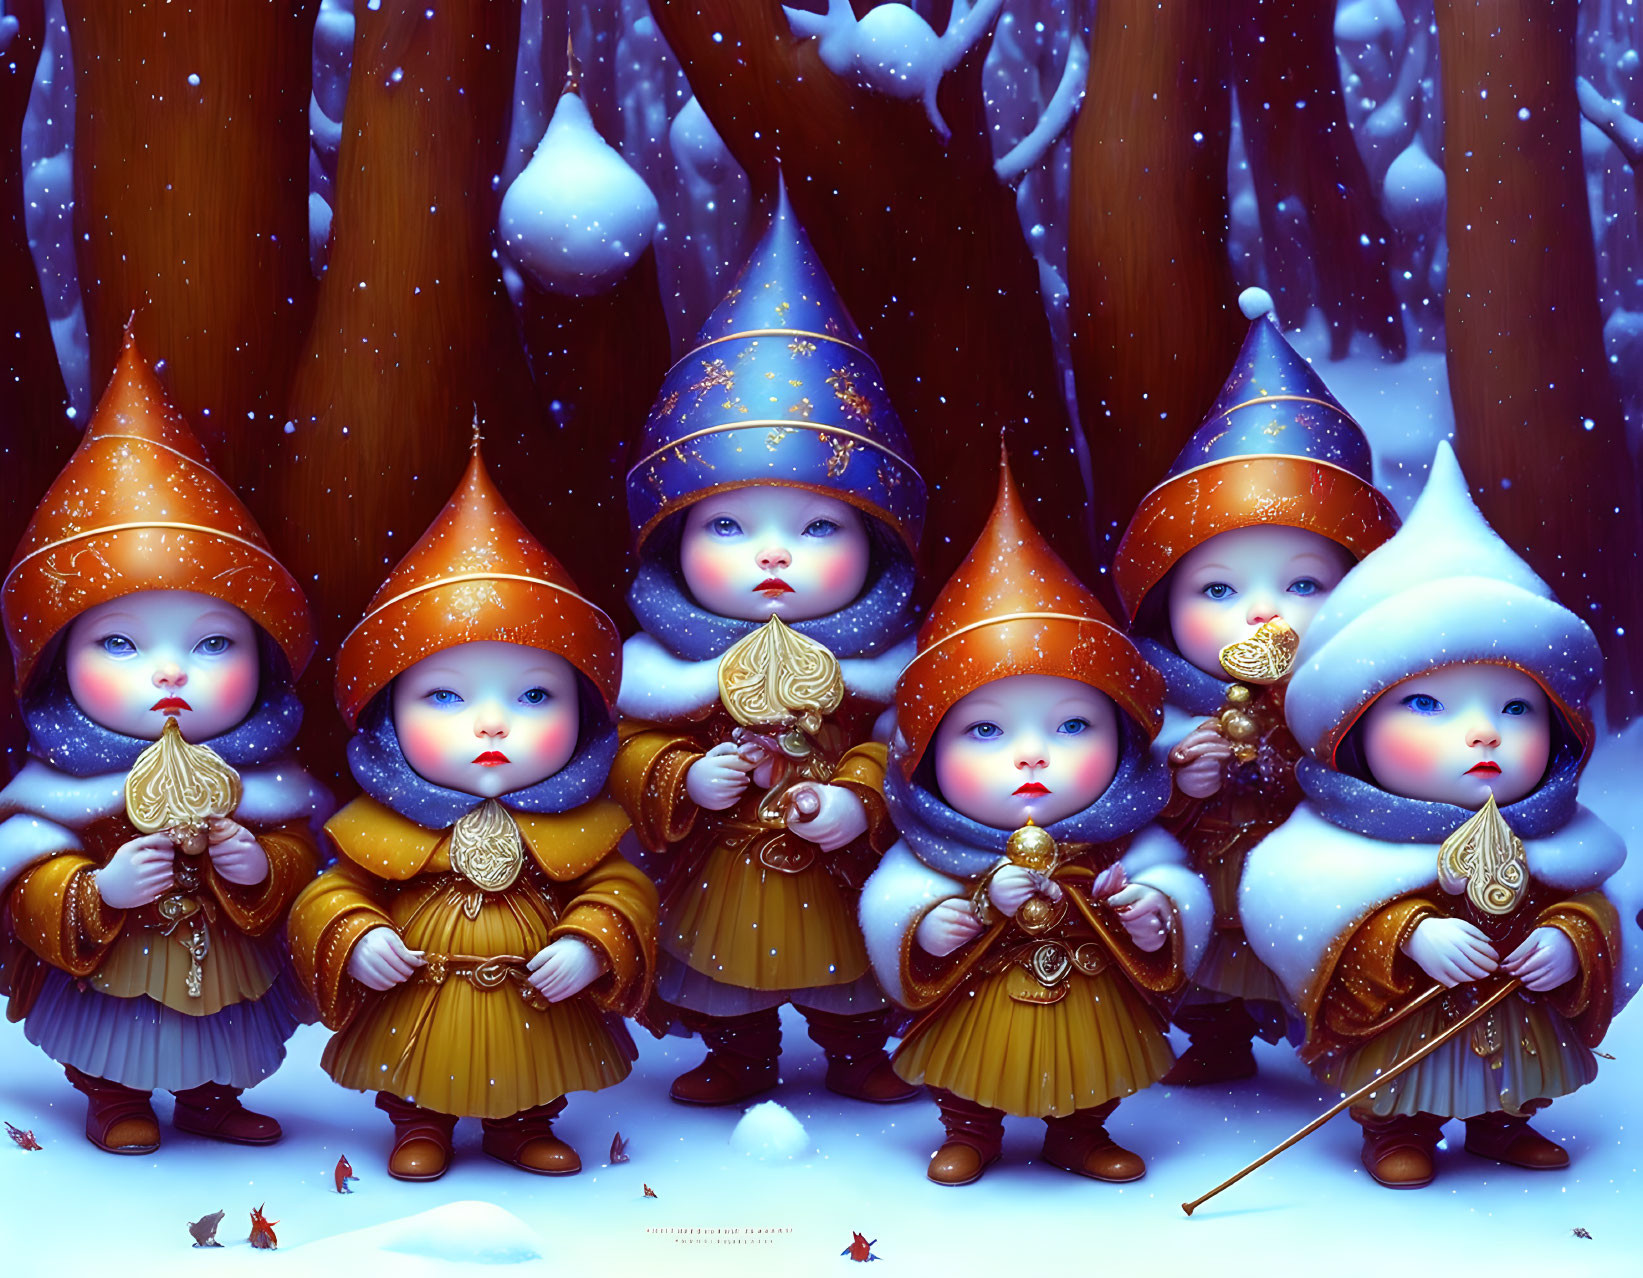 Colorful medieval fantasy characters in snowy forest